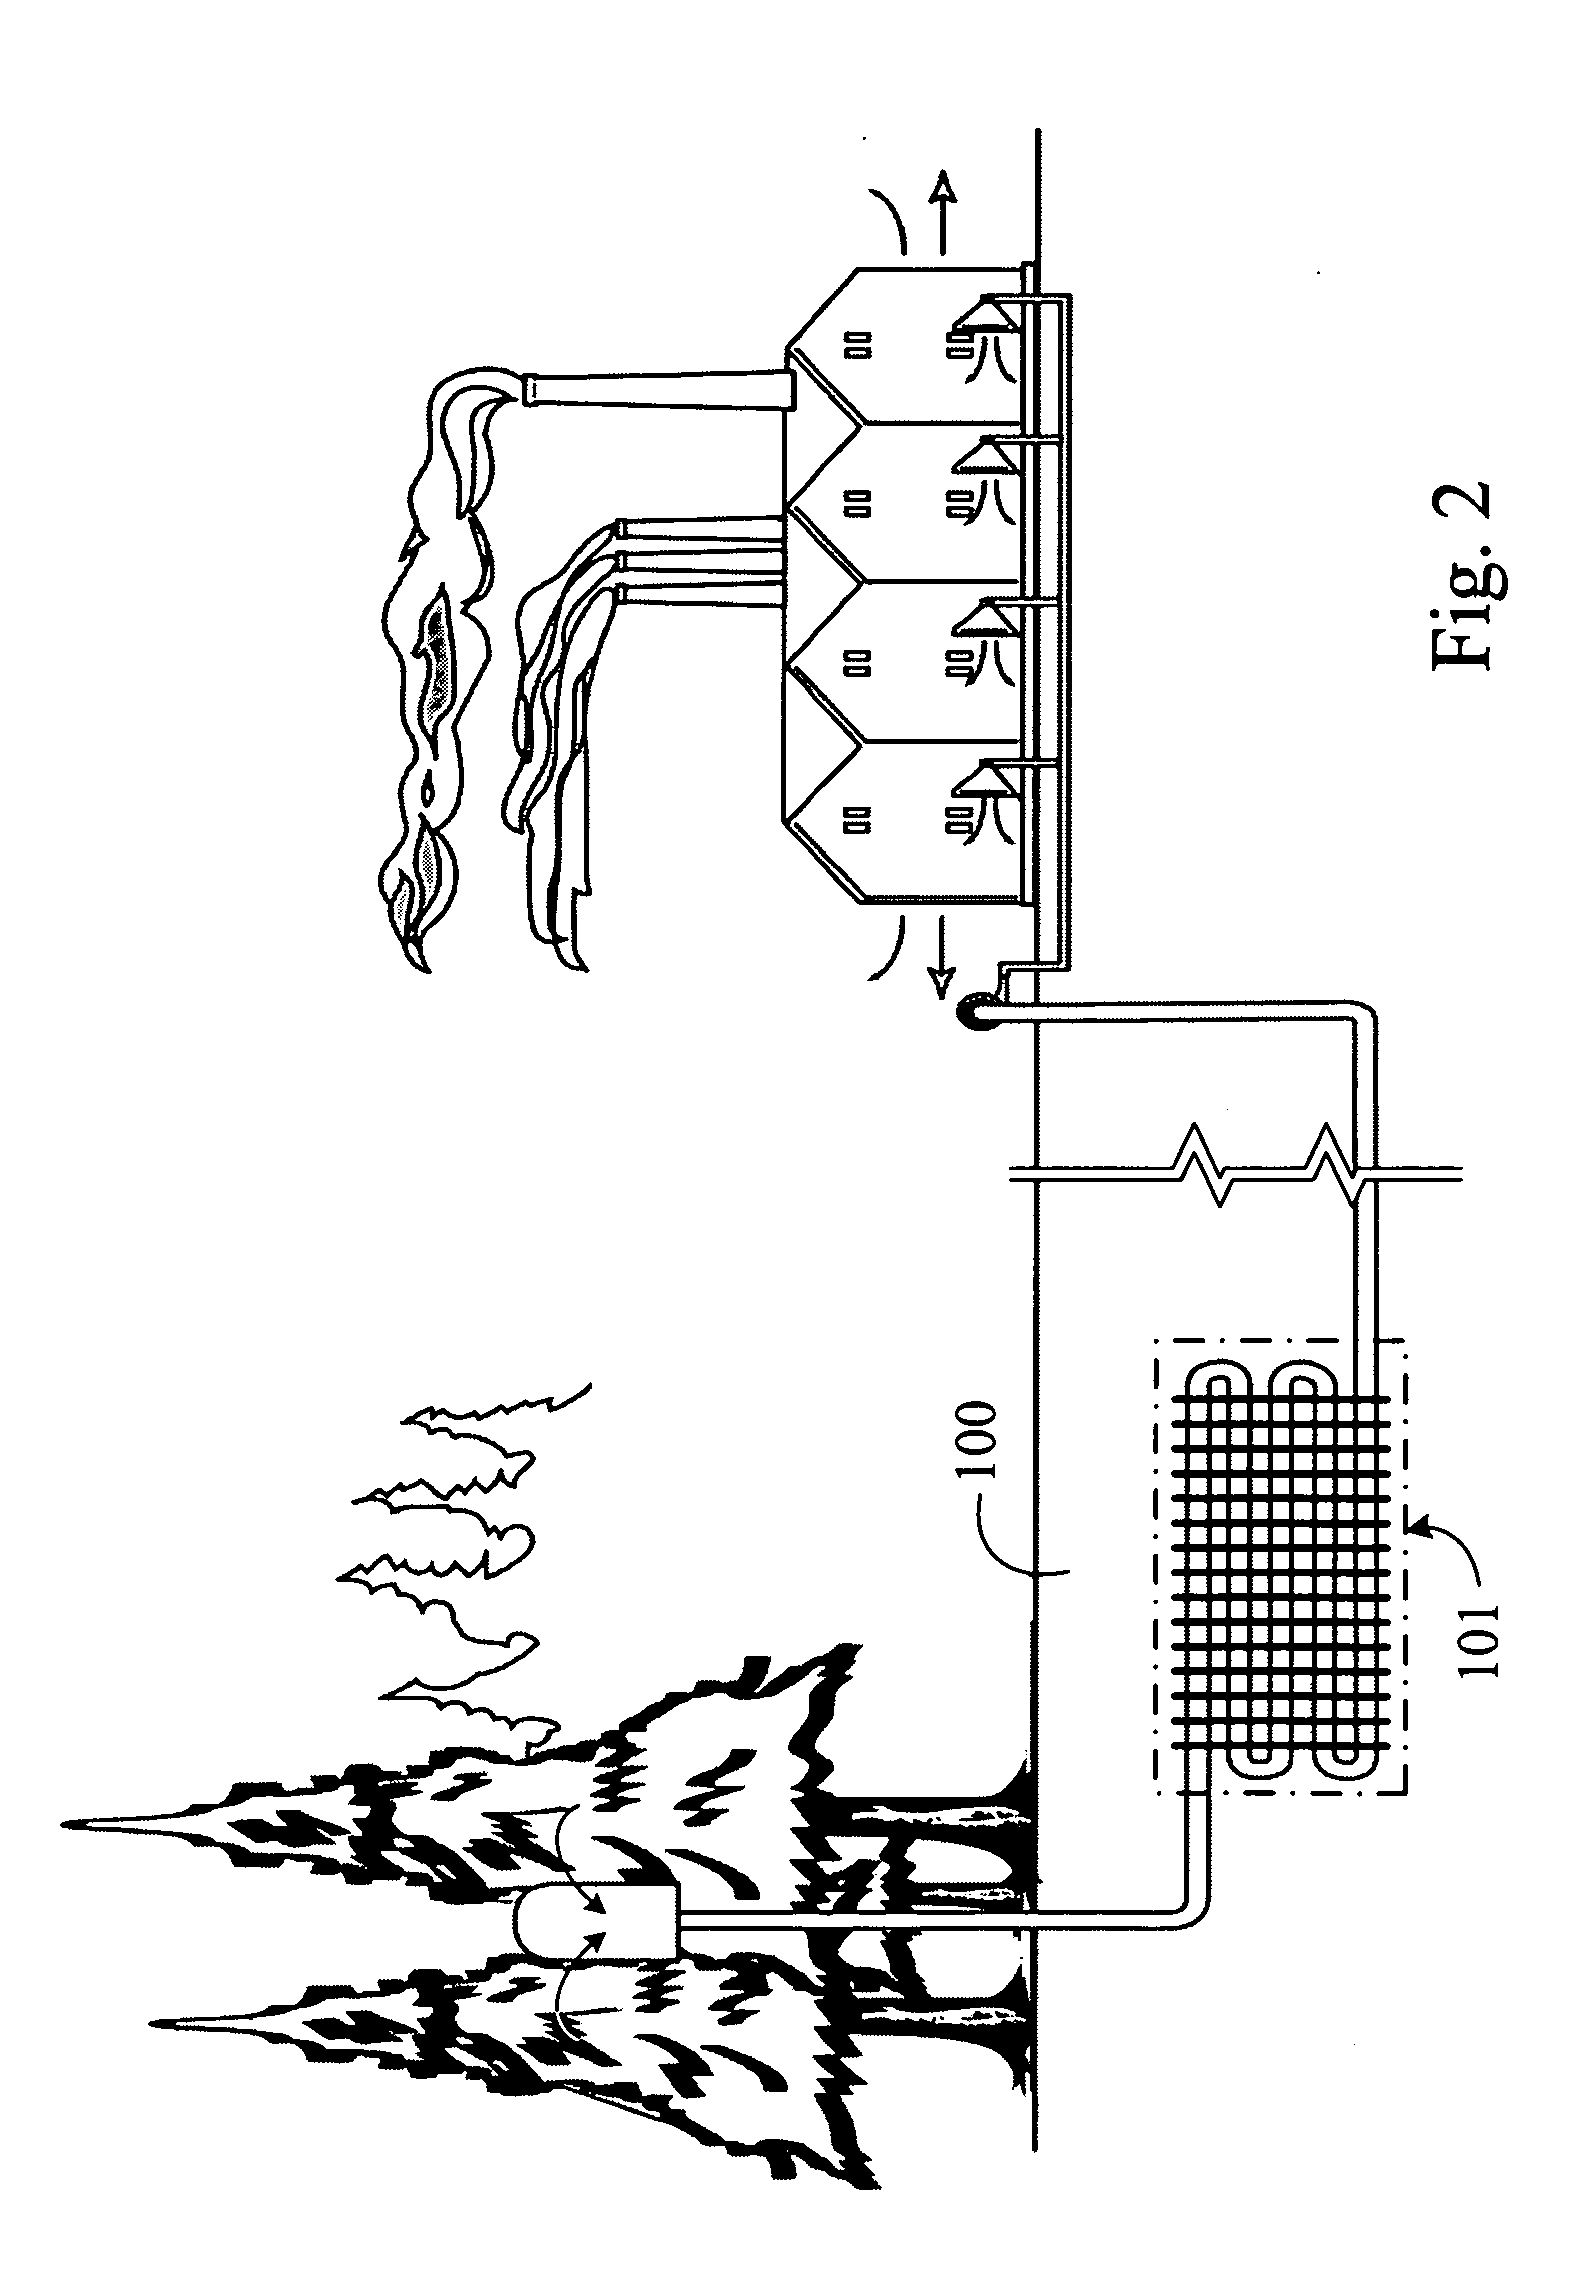 Temperature equalization air supply system of natural thermal energy with intermediate thermal storage